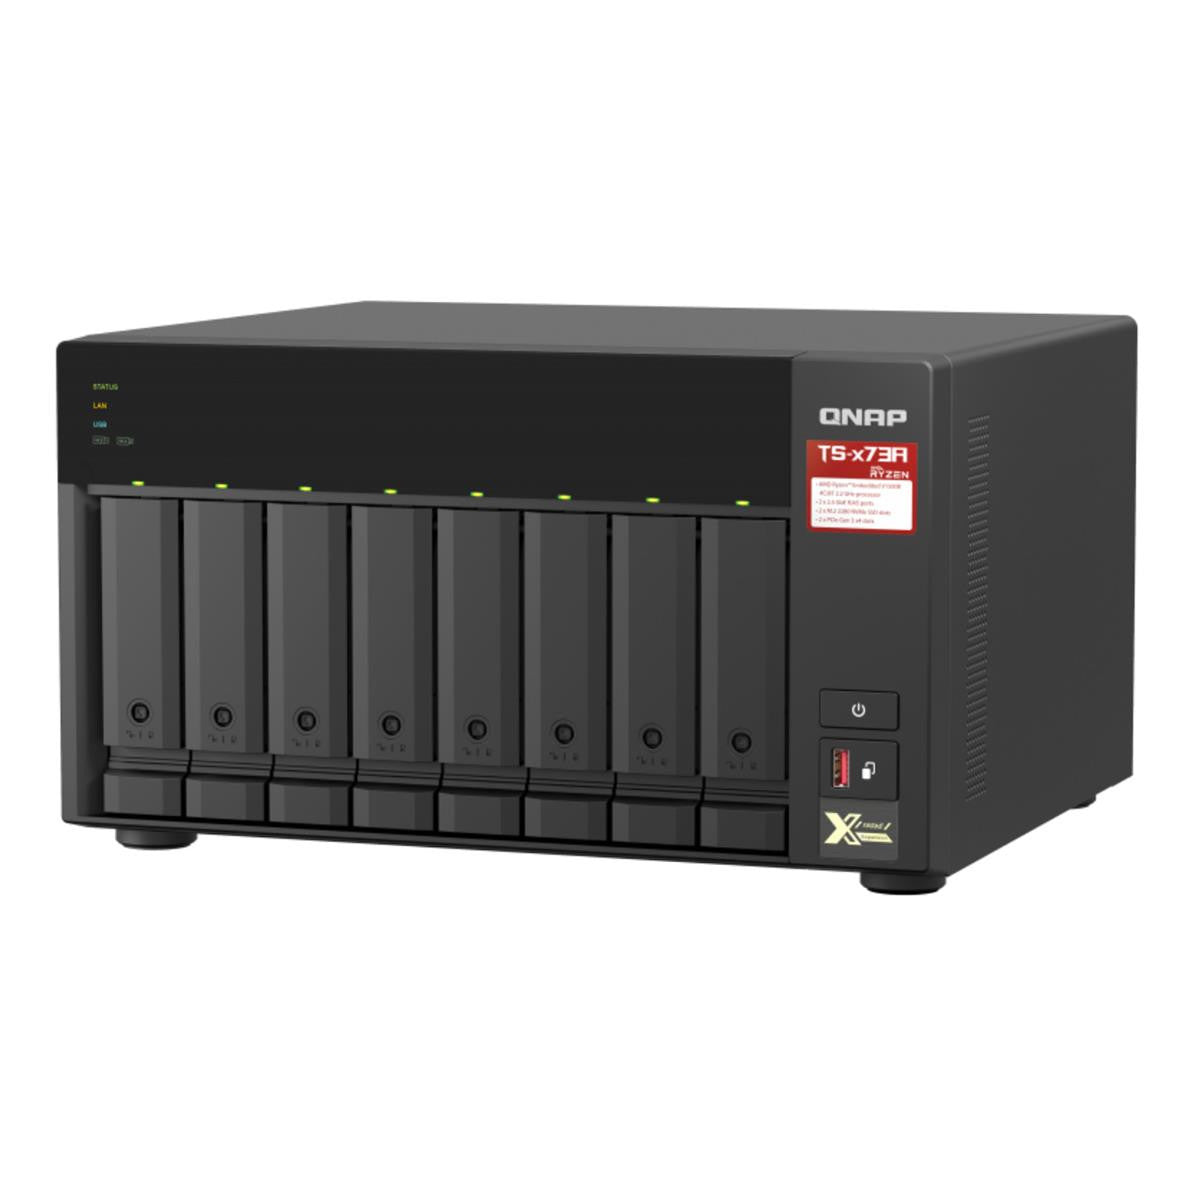 QNAP TS-873A 8-BAY NAS with 8GB DDR4 RAM and 96TB (8x12TB) Western Digital RED PLUS Drives Fully Assembled and Tested